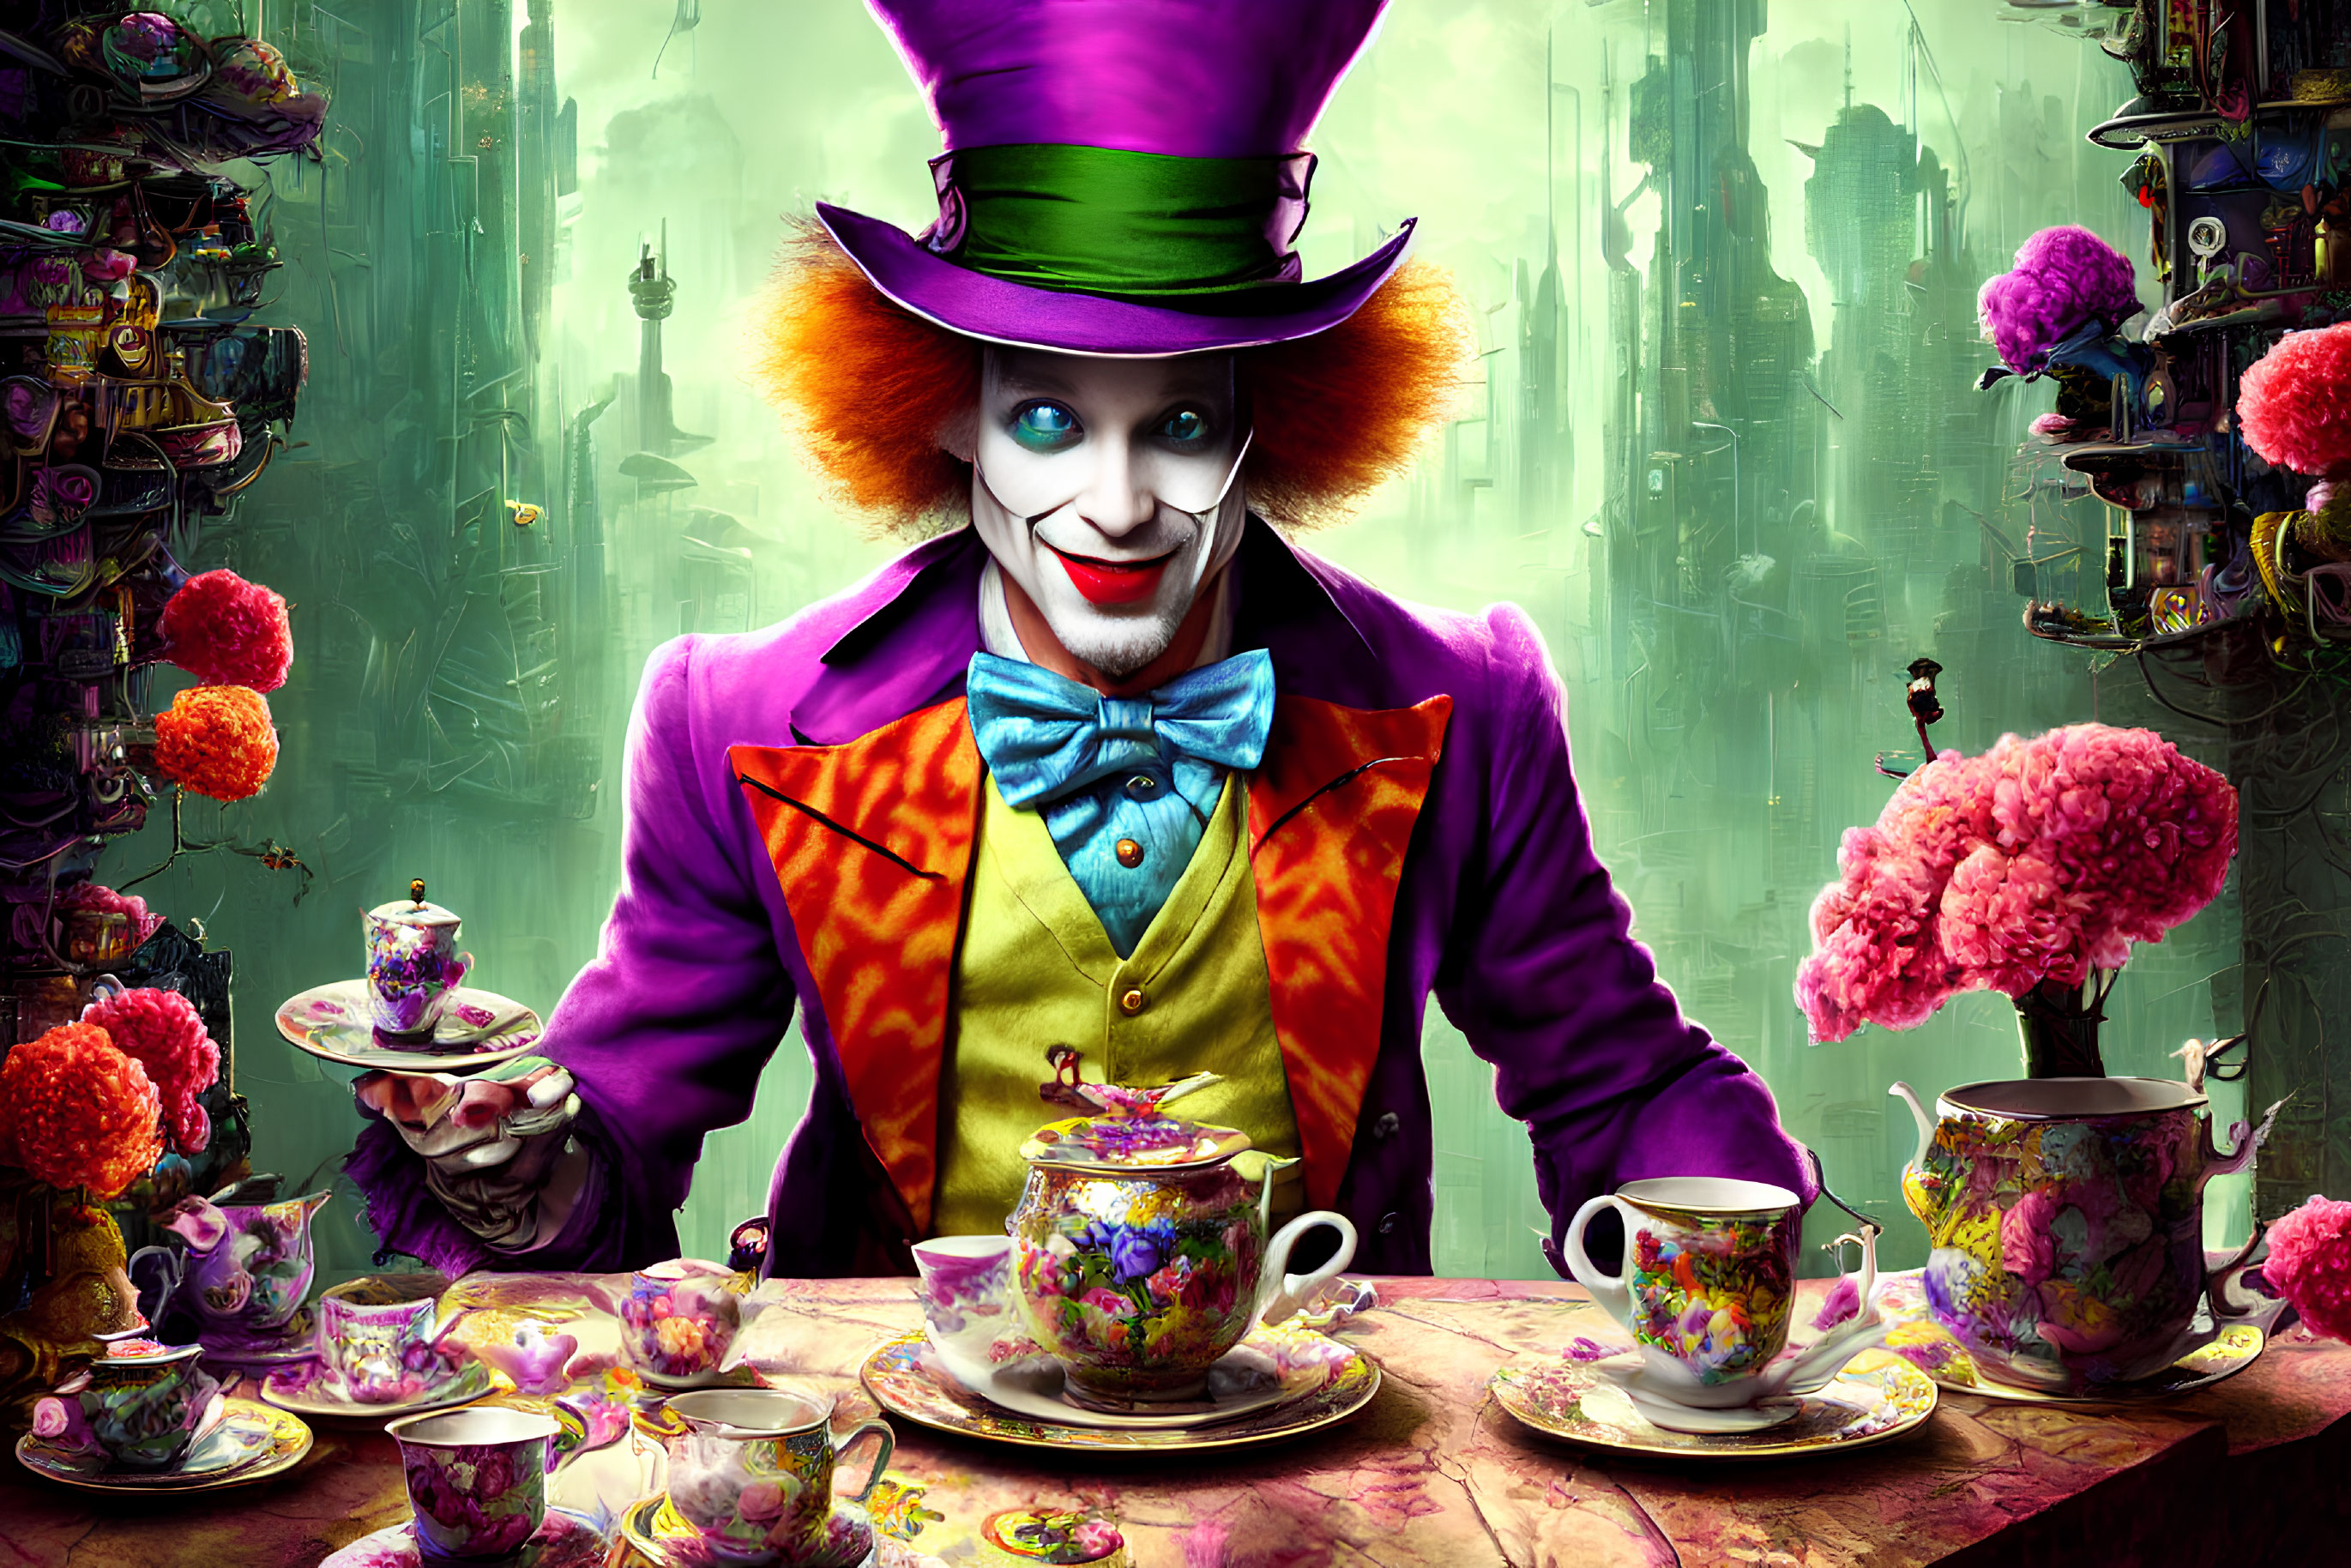 Colorful character in top hat serving tea in whimsical setting